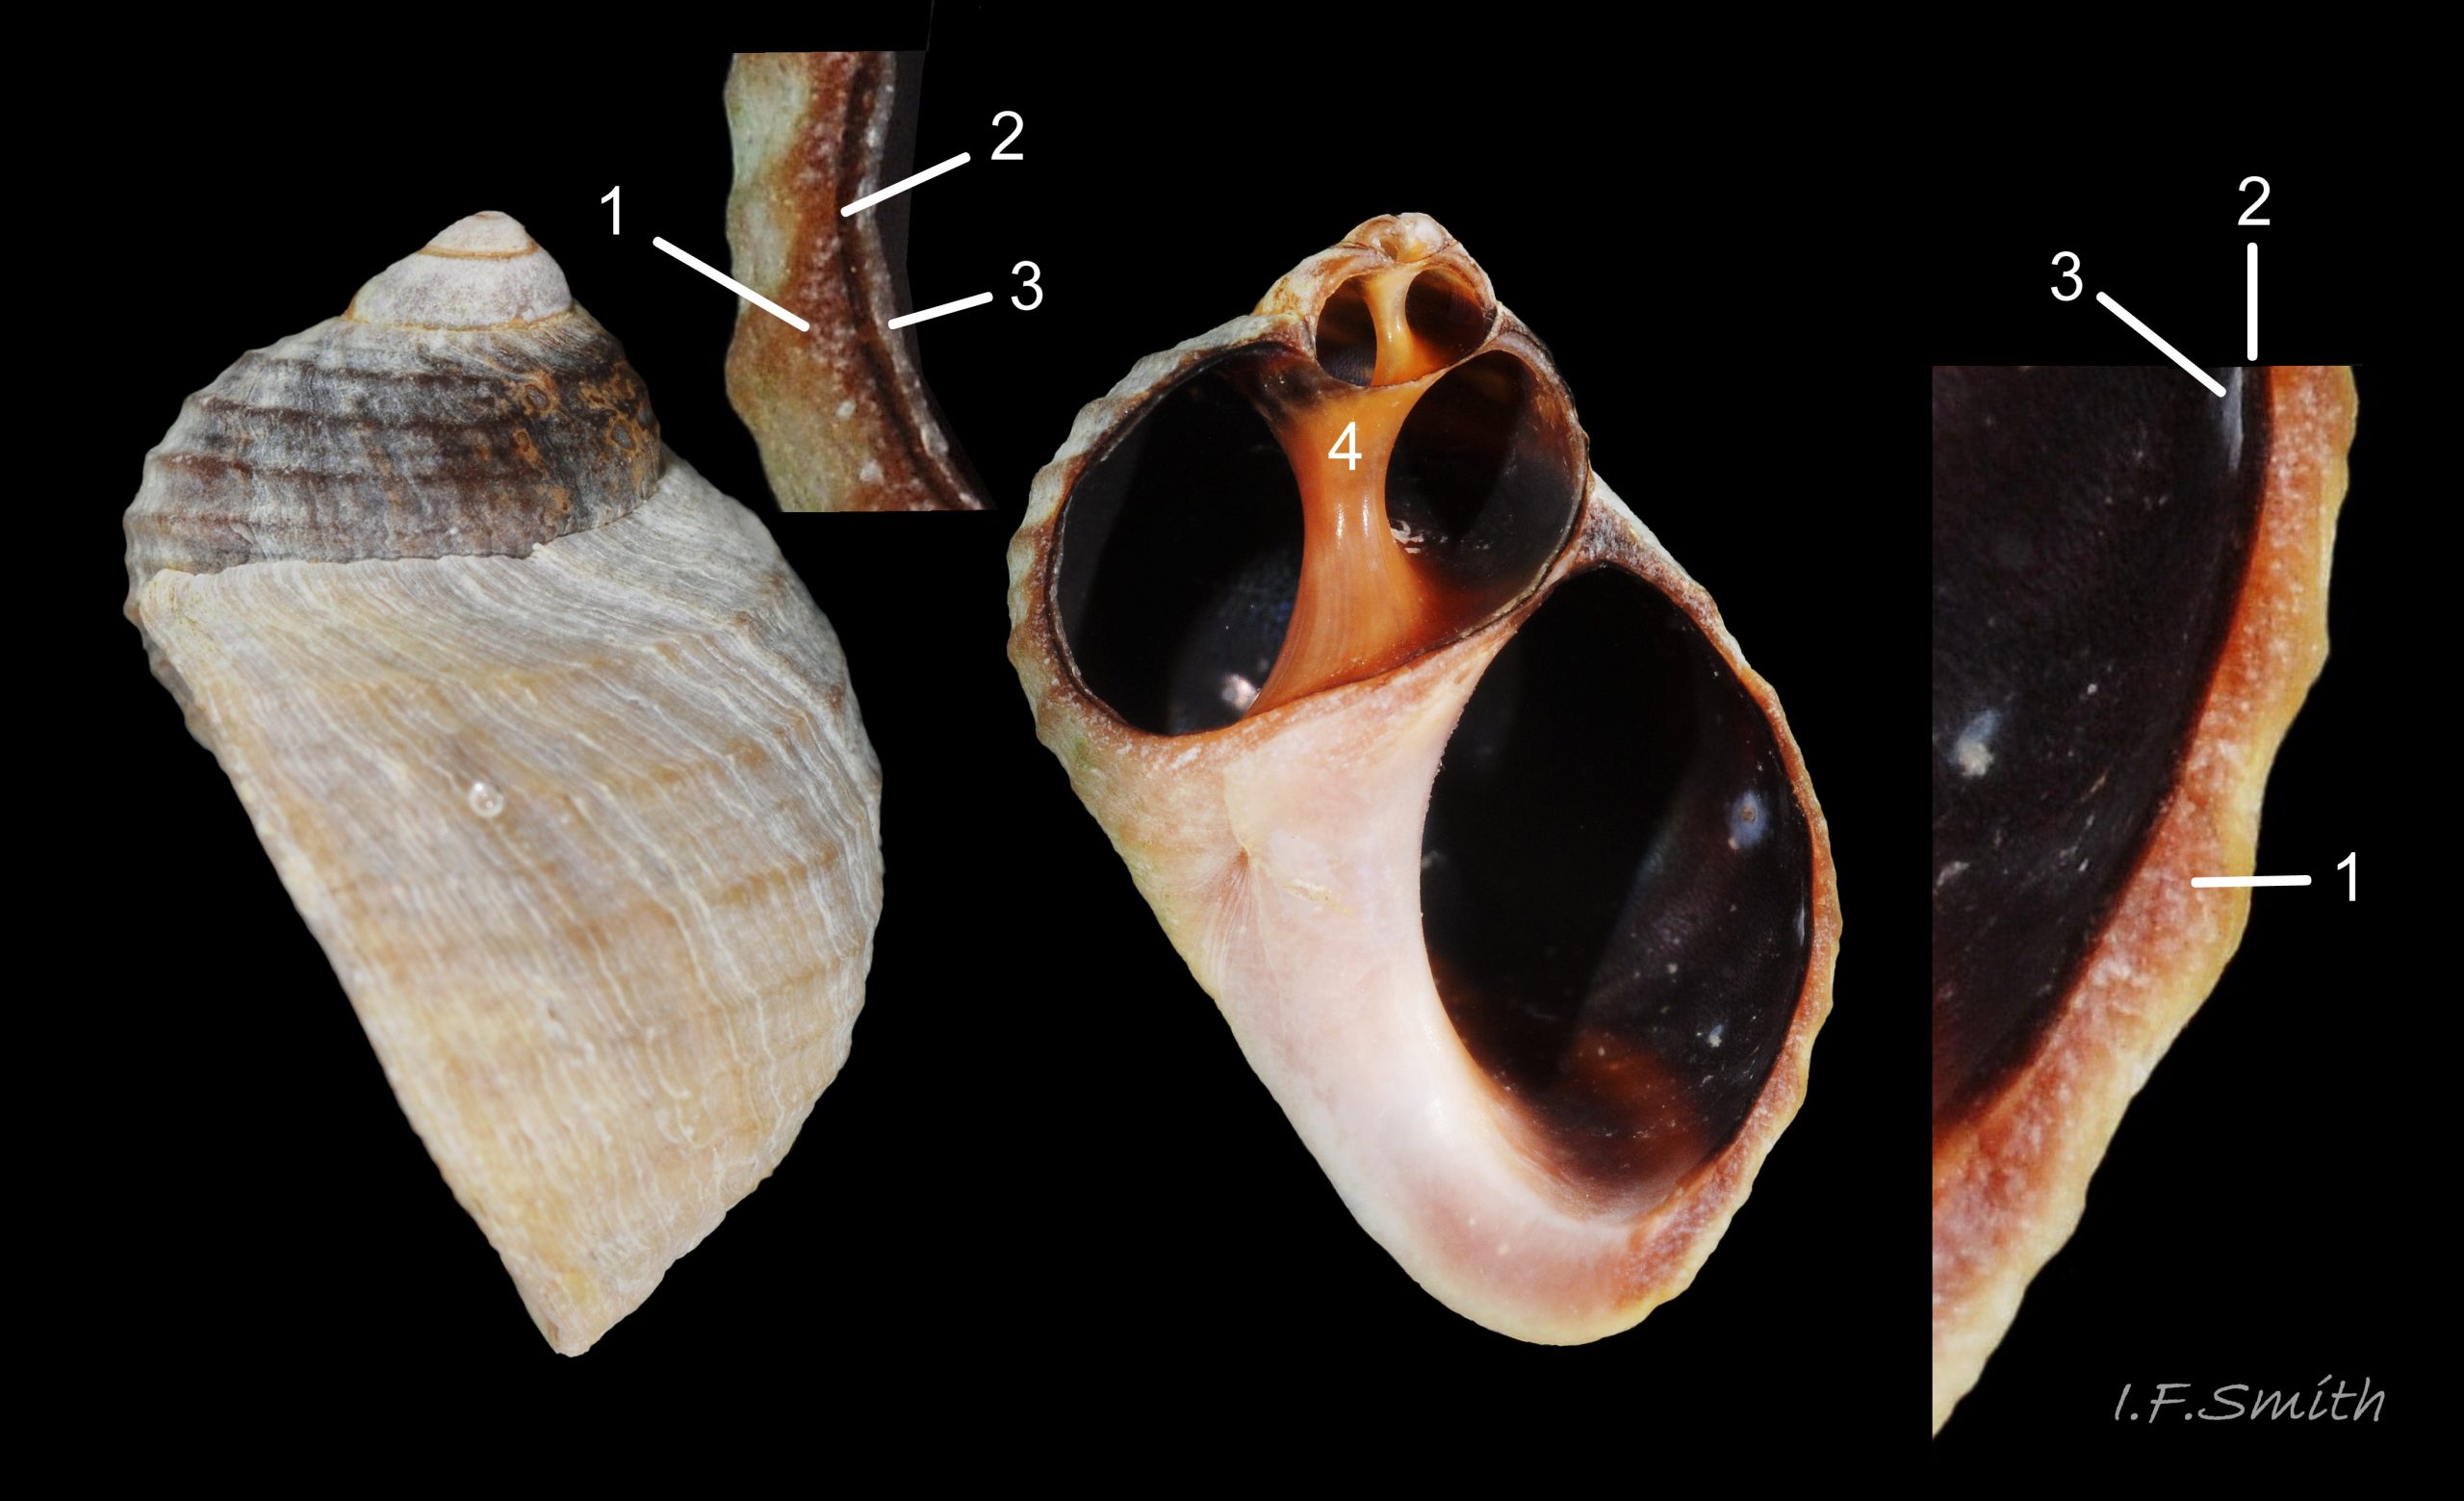 13 Littorina arcana. Sectioned shell to show structure. Insets 3X scale of main subjects. N. Yorkshire, September 2014.